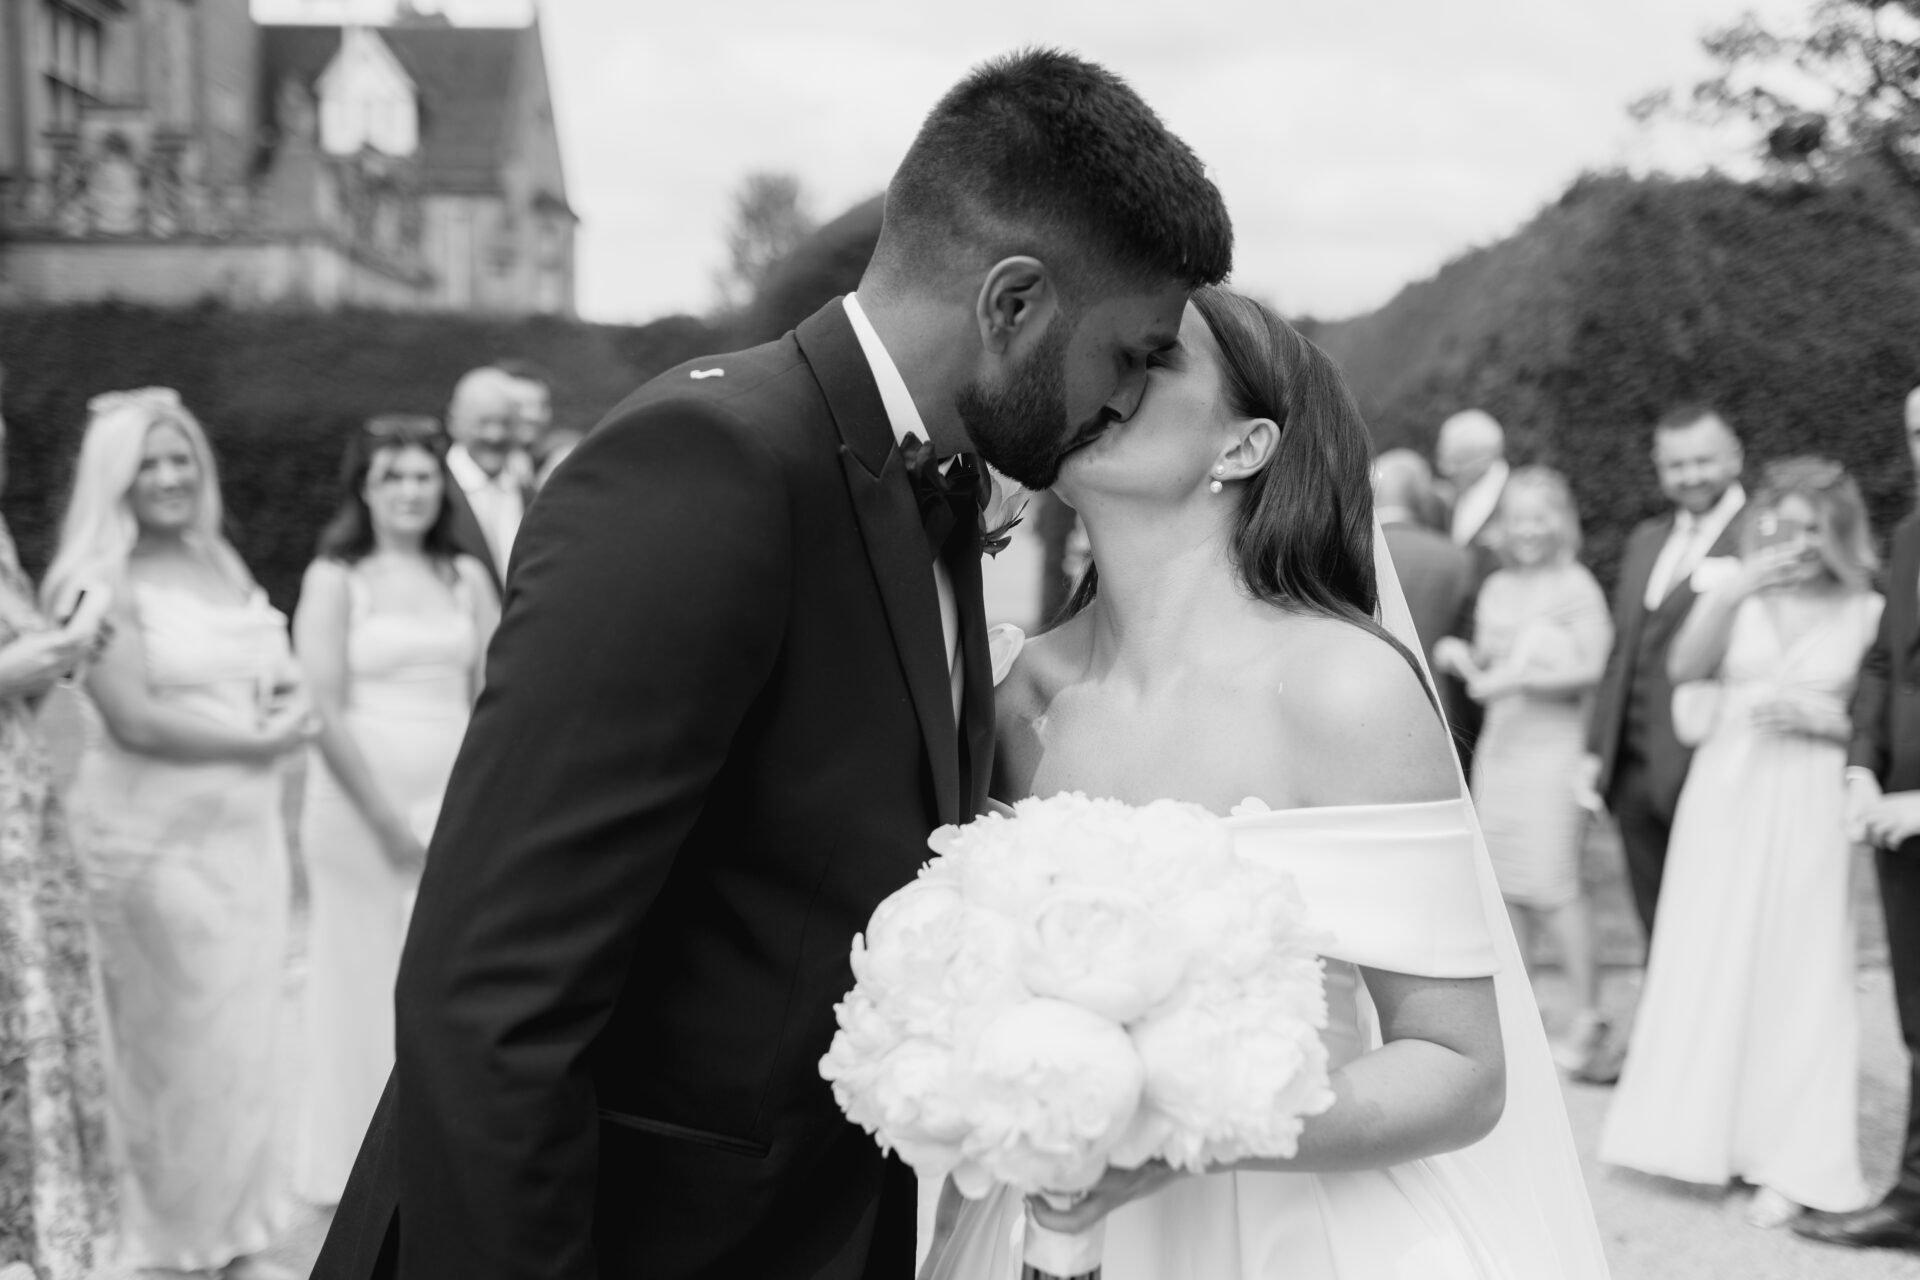 The bride and groom share a kiss at Tortworth Court